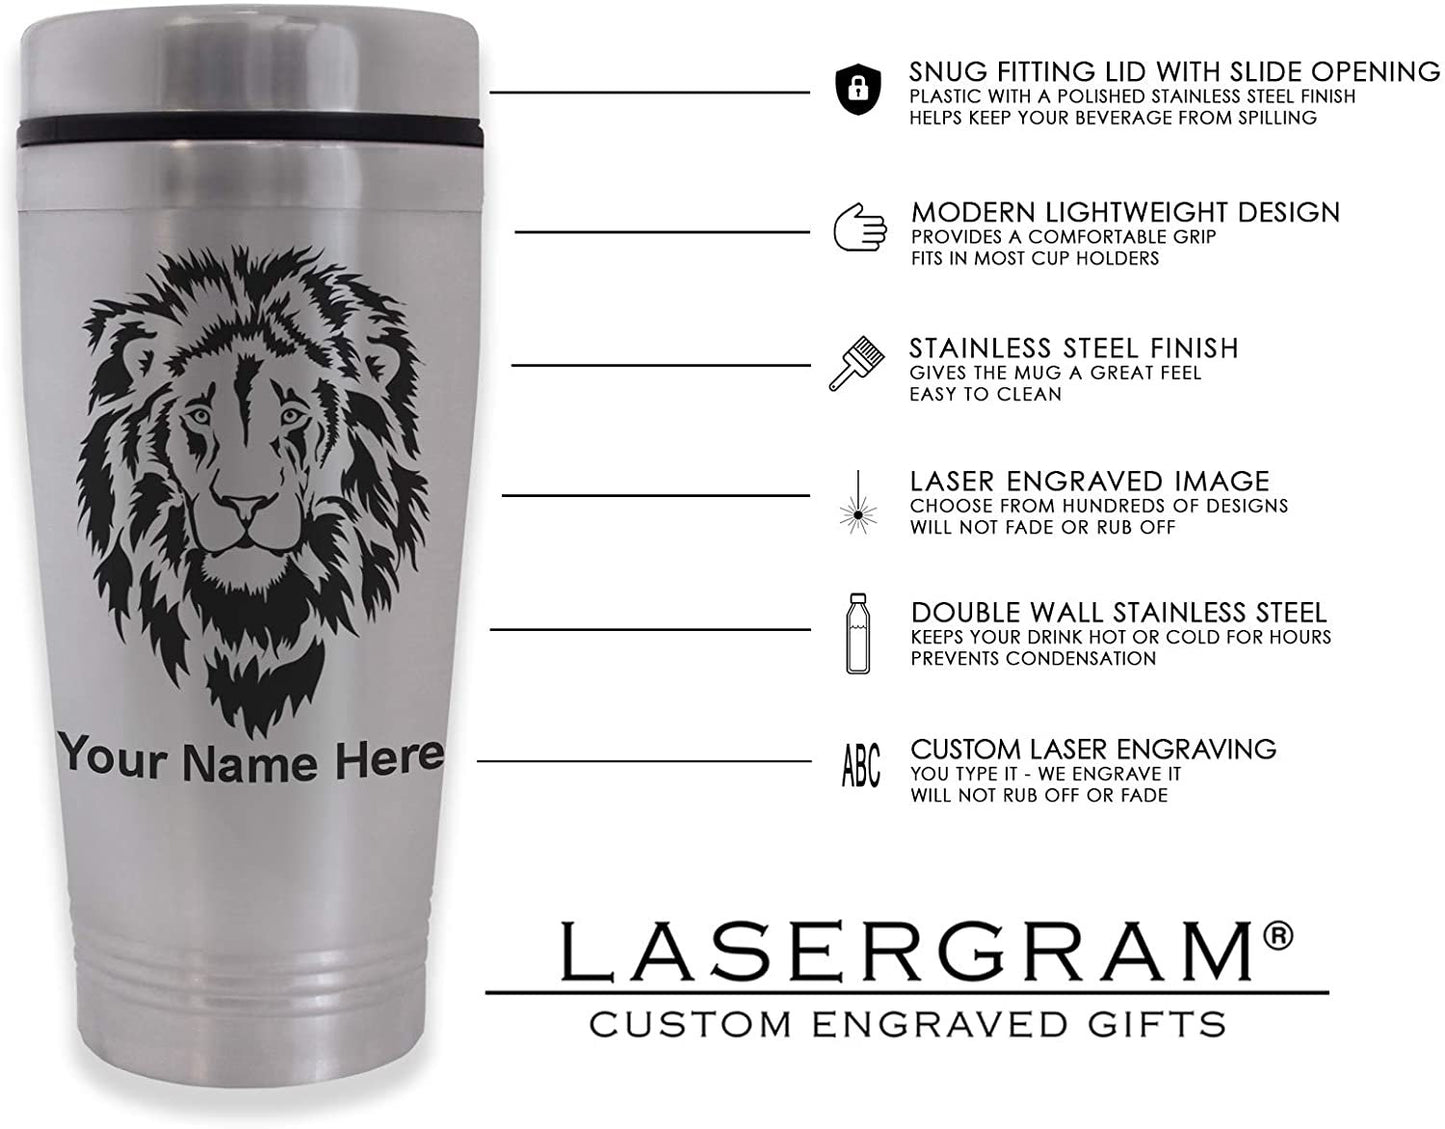 Commuter Travel Mug, Aerial Silks, Personalized Engraving Included